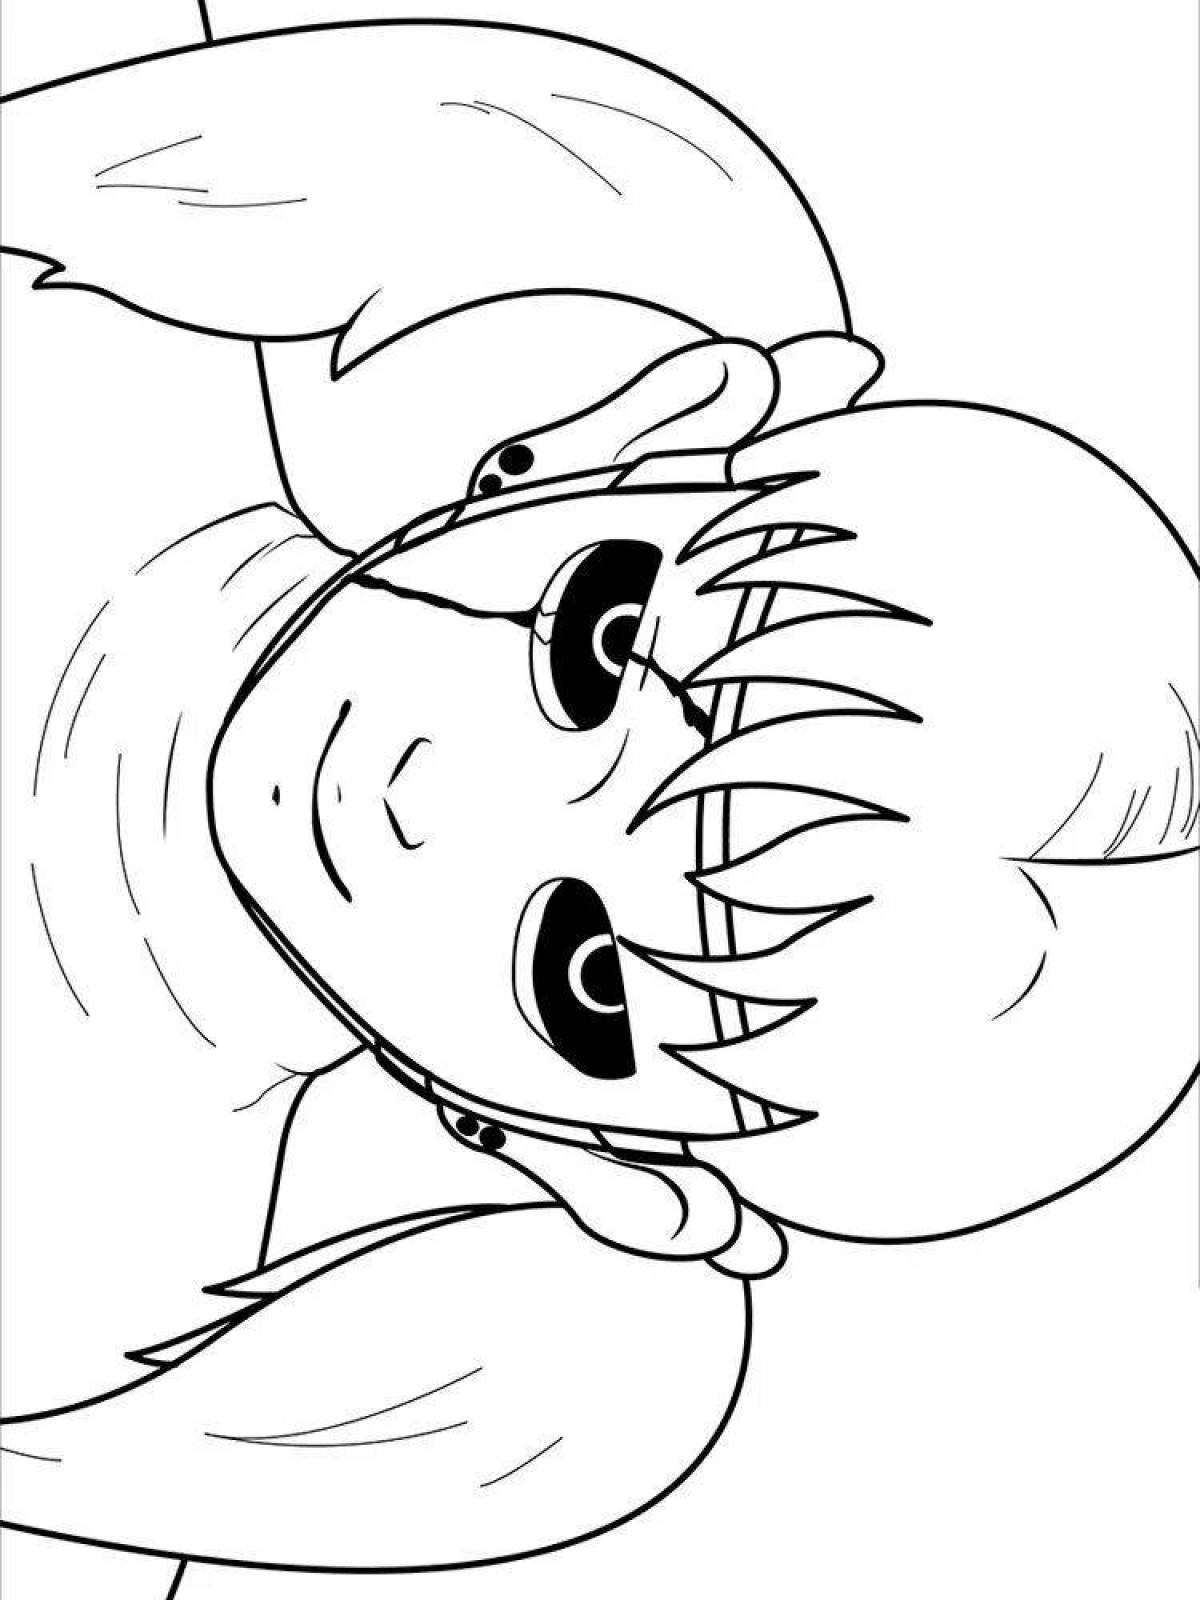 Animated sally face coloring page